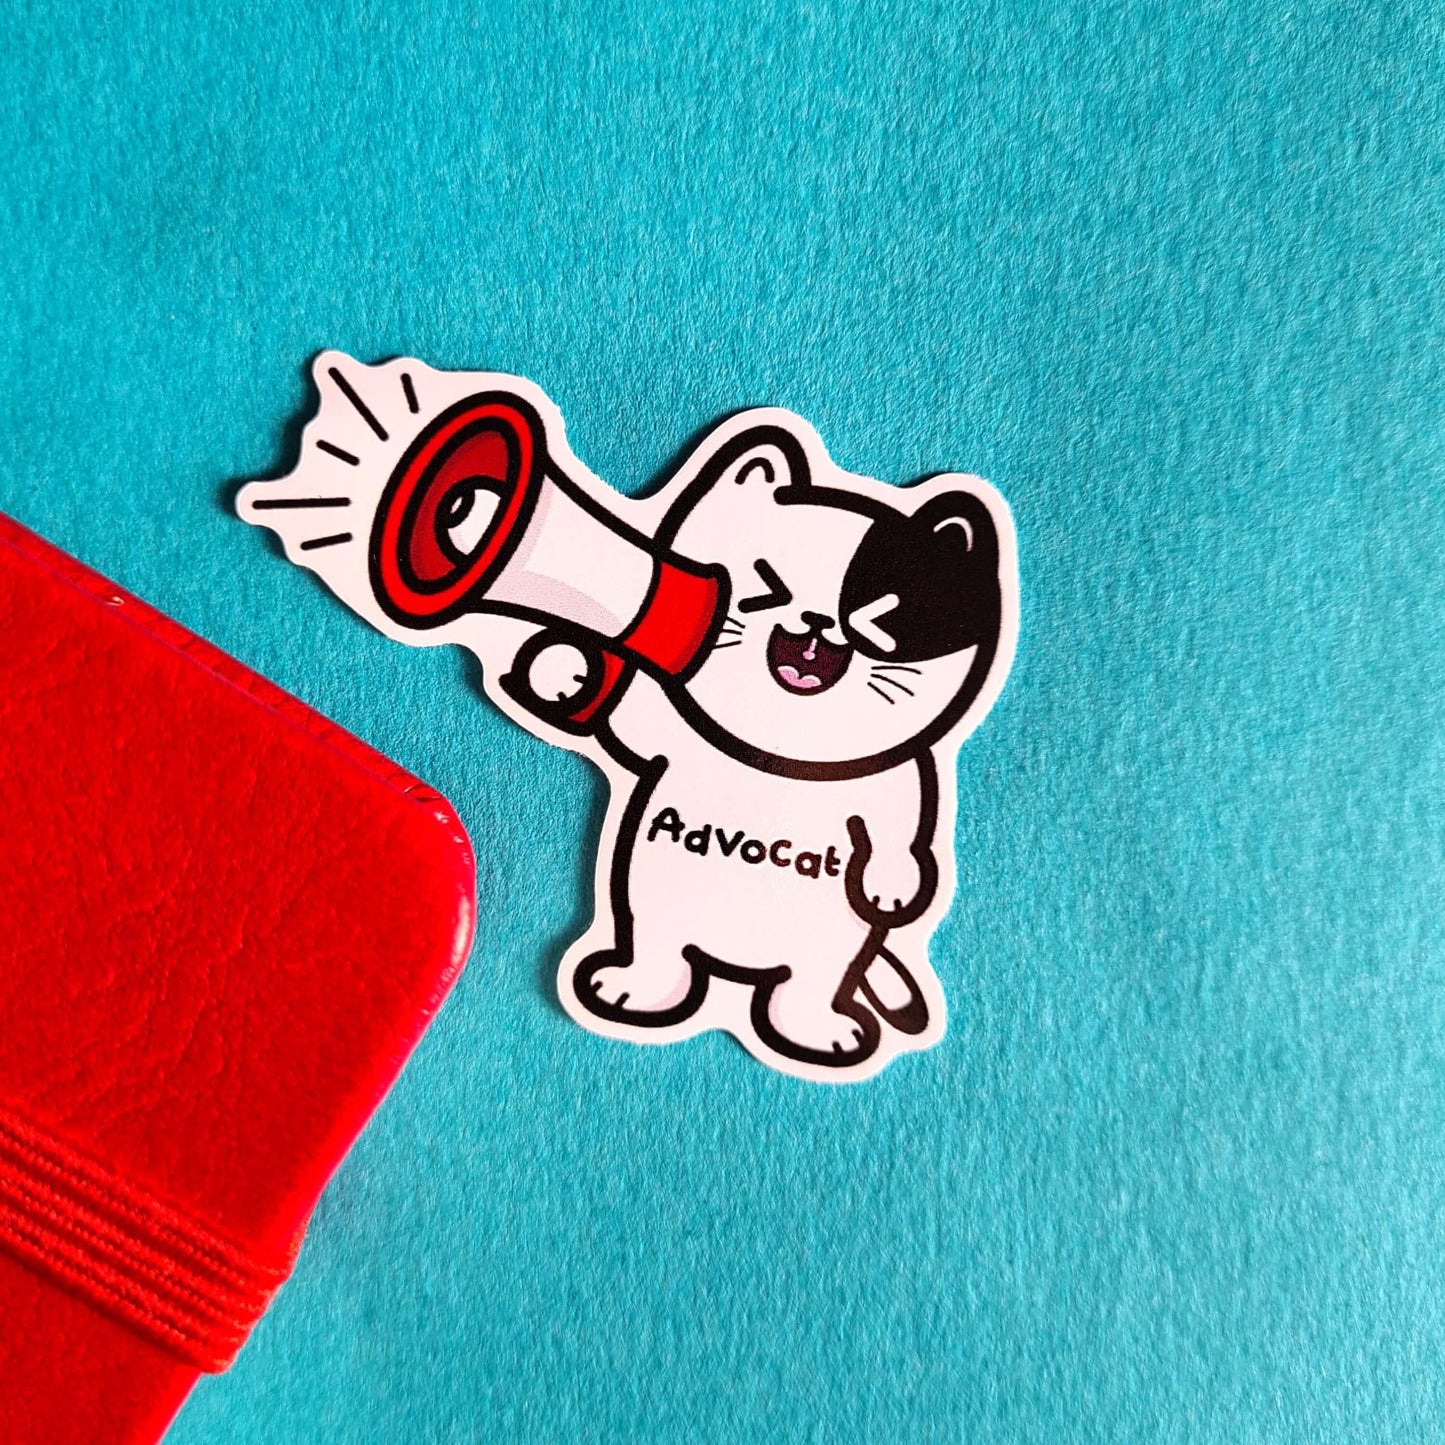 The Advocate Cat Sticker on a red and blue background. The black and white cat shape vinyl sticker is smiling shouting into a red and white megaphone with black text across its middle reading 'advocat'. The hand drawn design is raising awareness for mental health and disabilities.